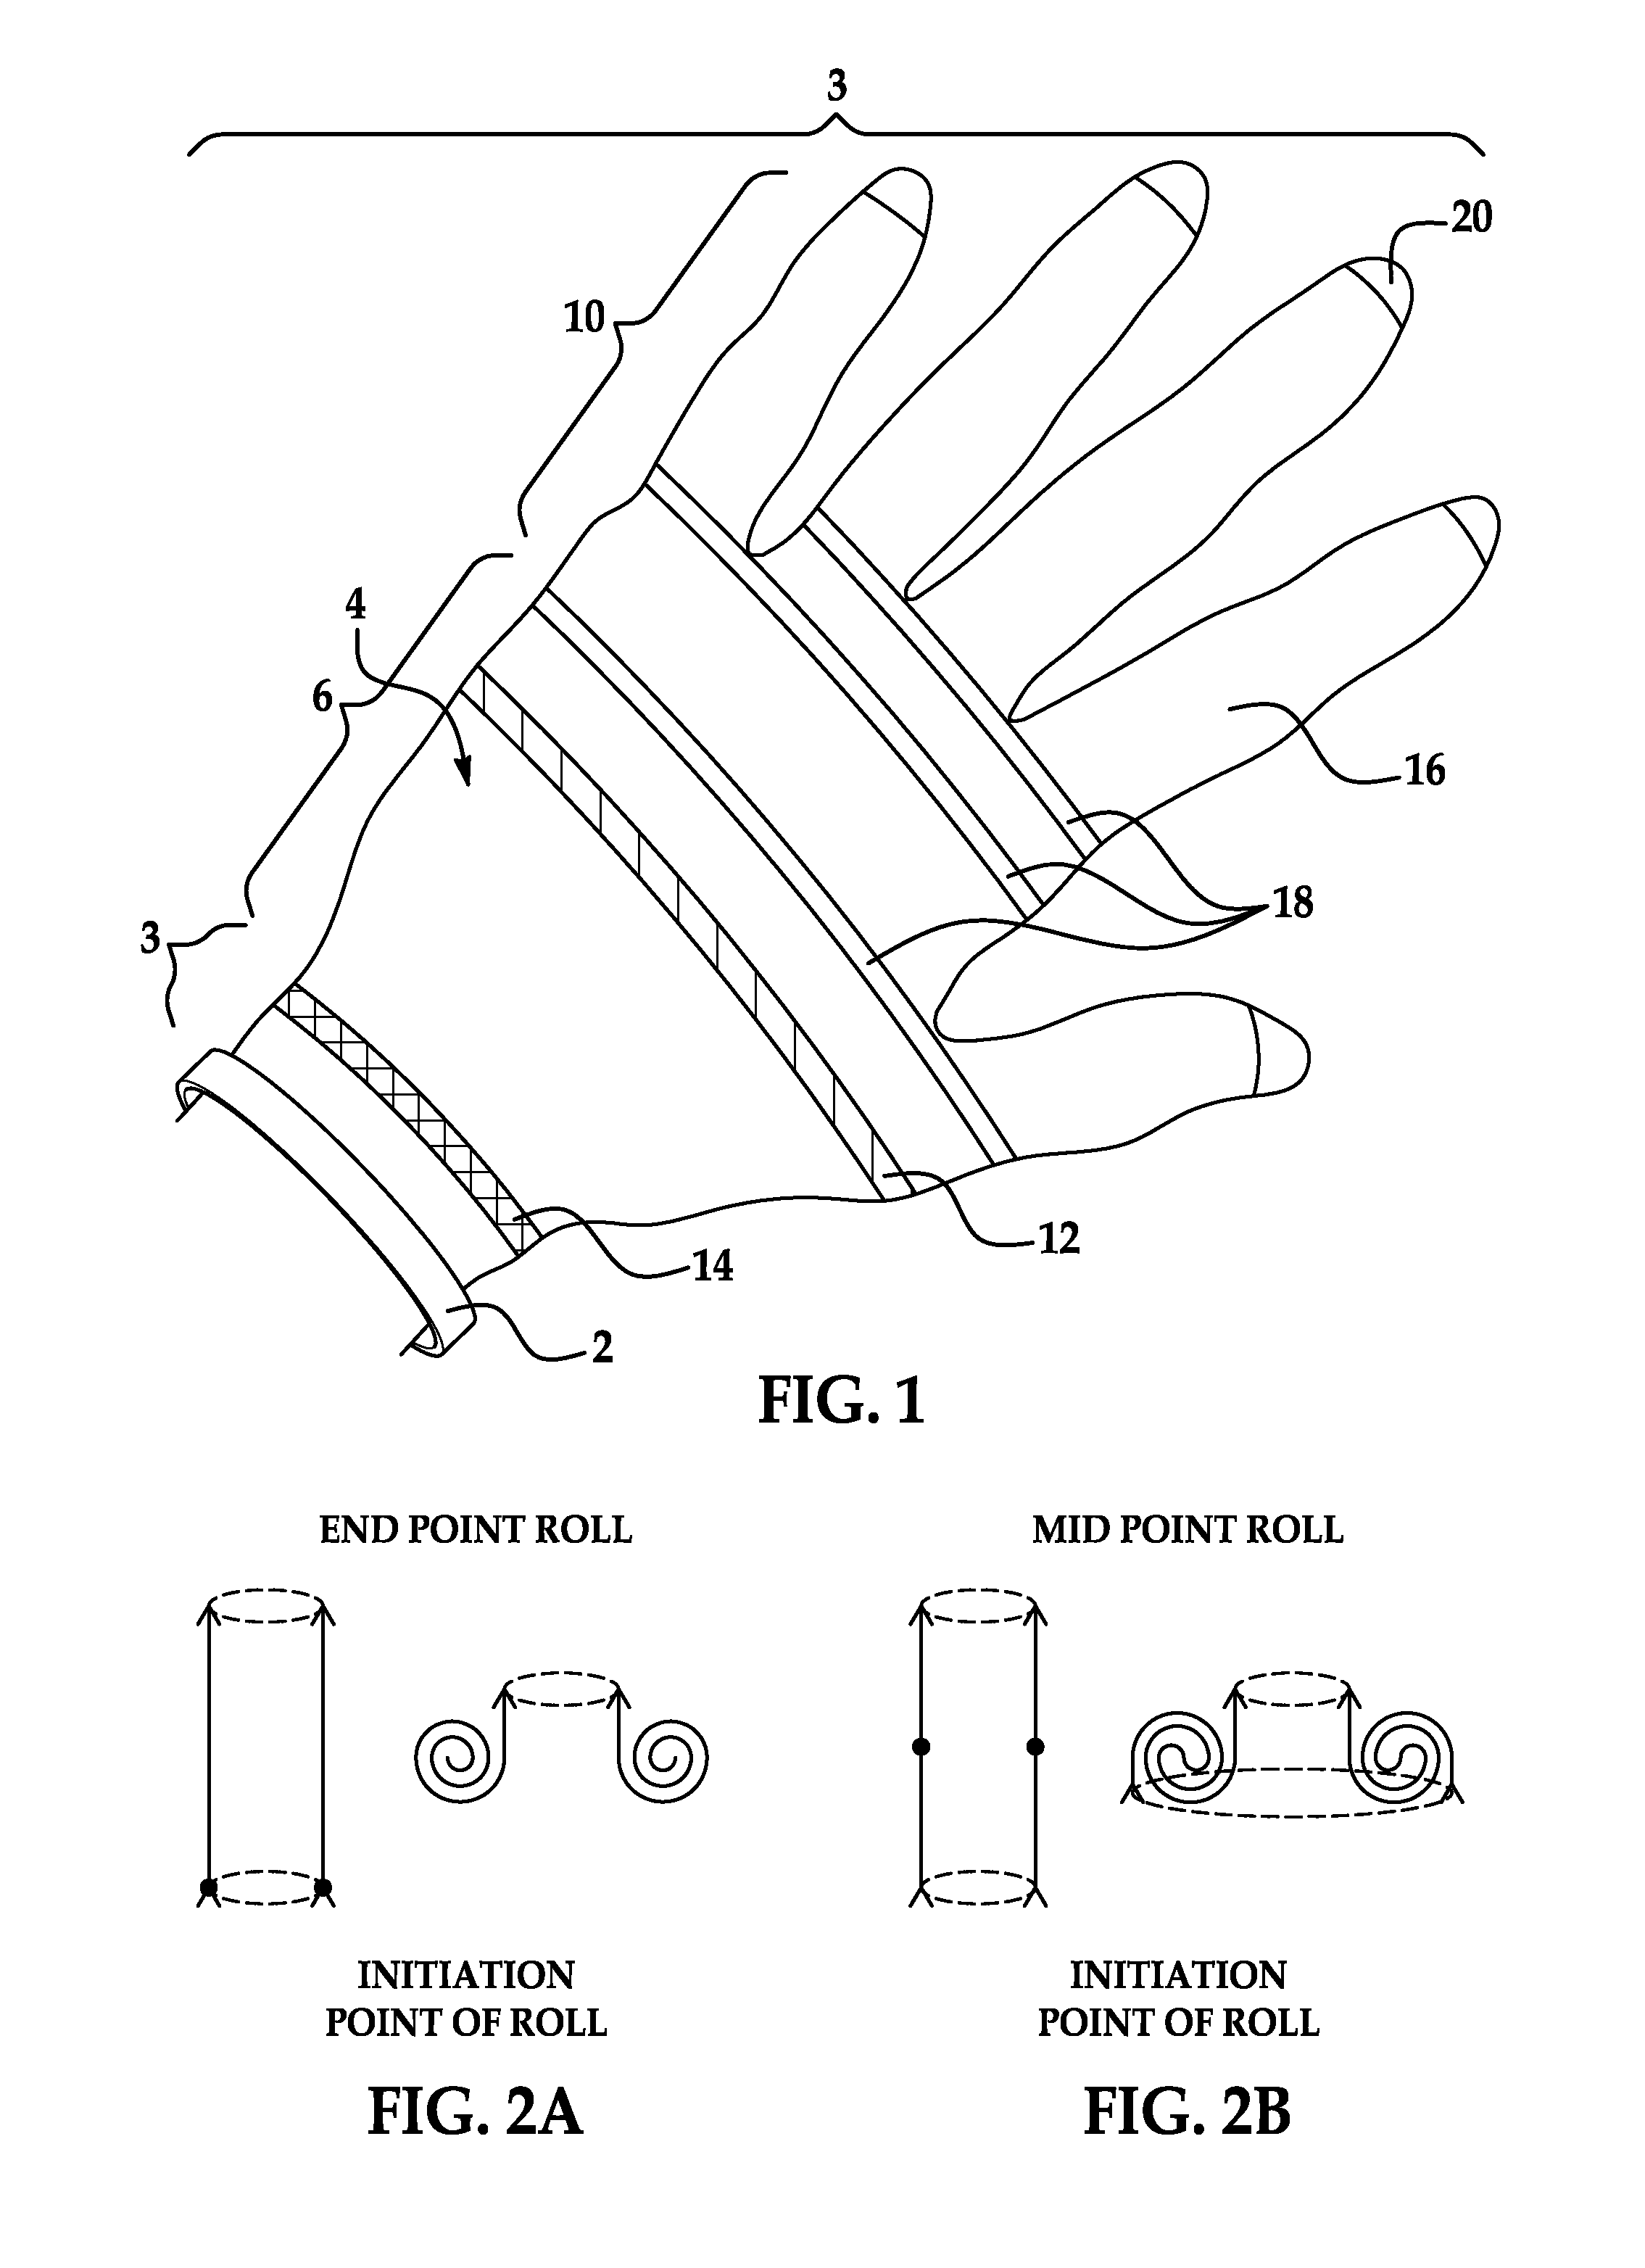 Surgical glove appliance device